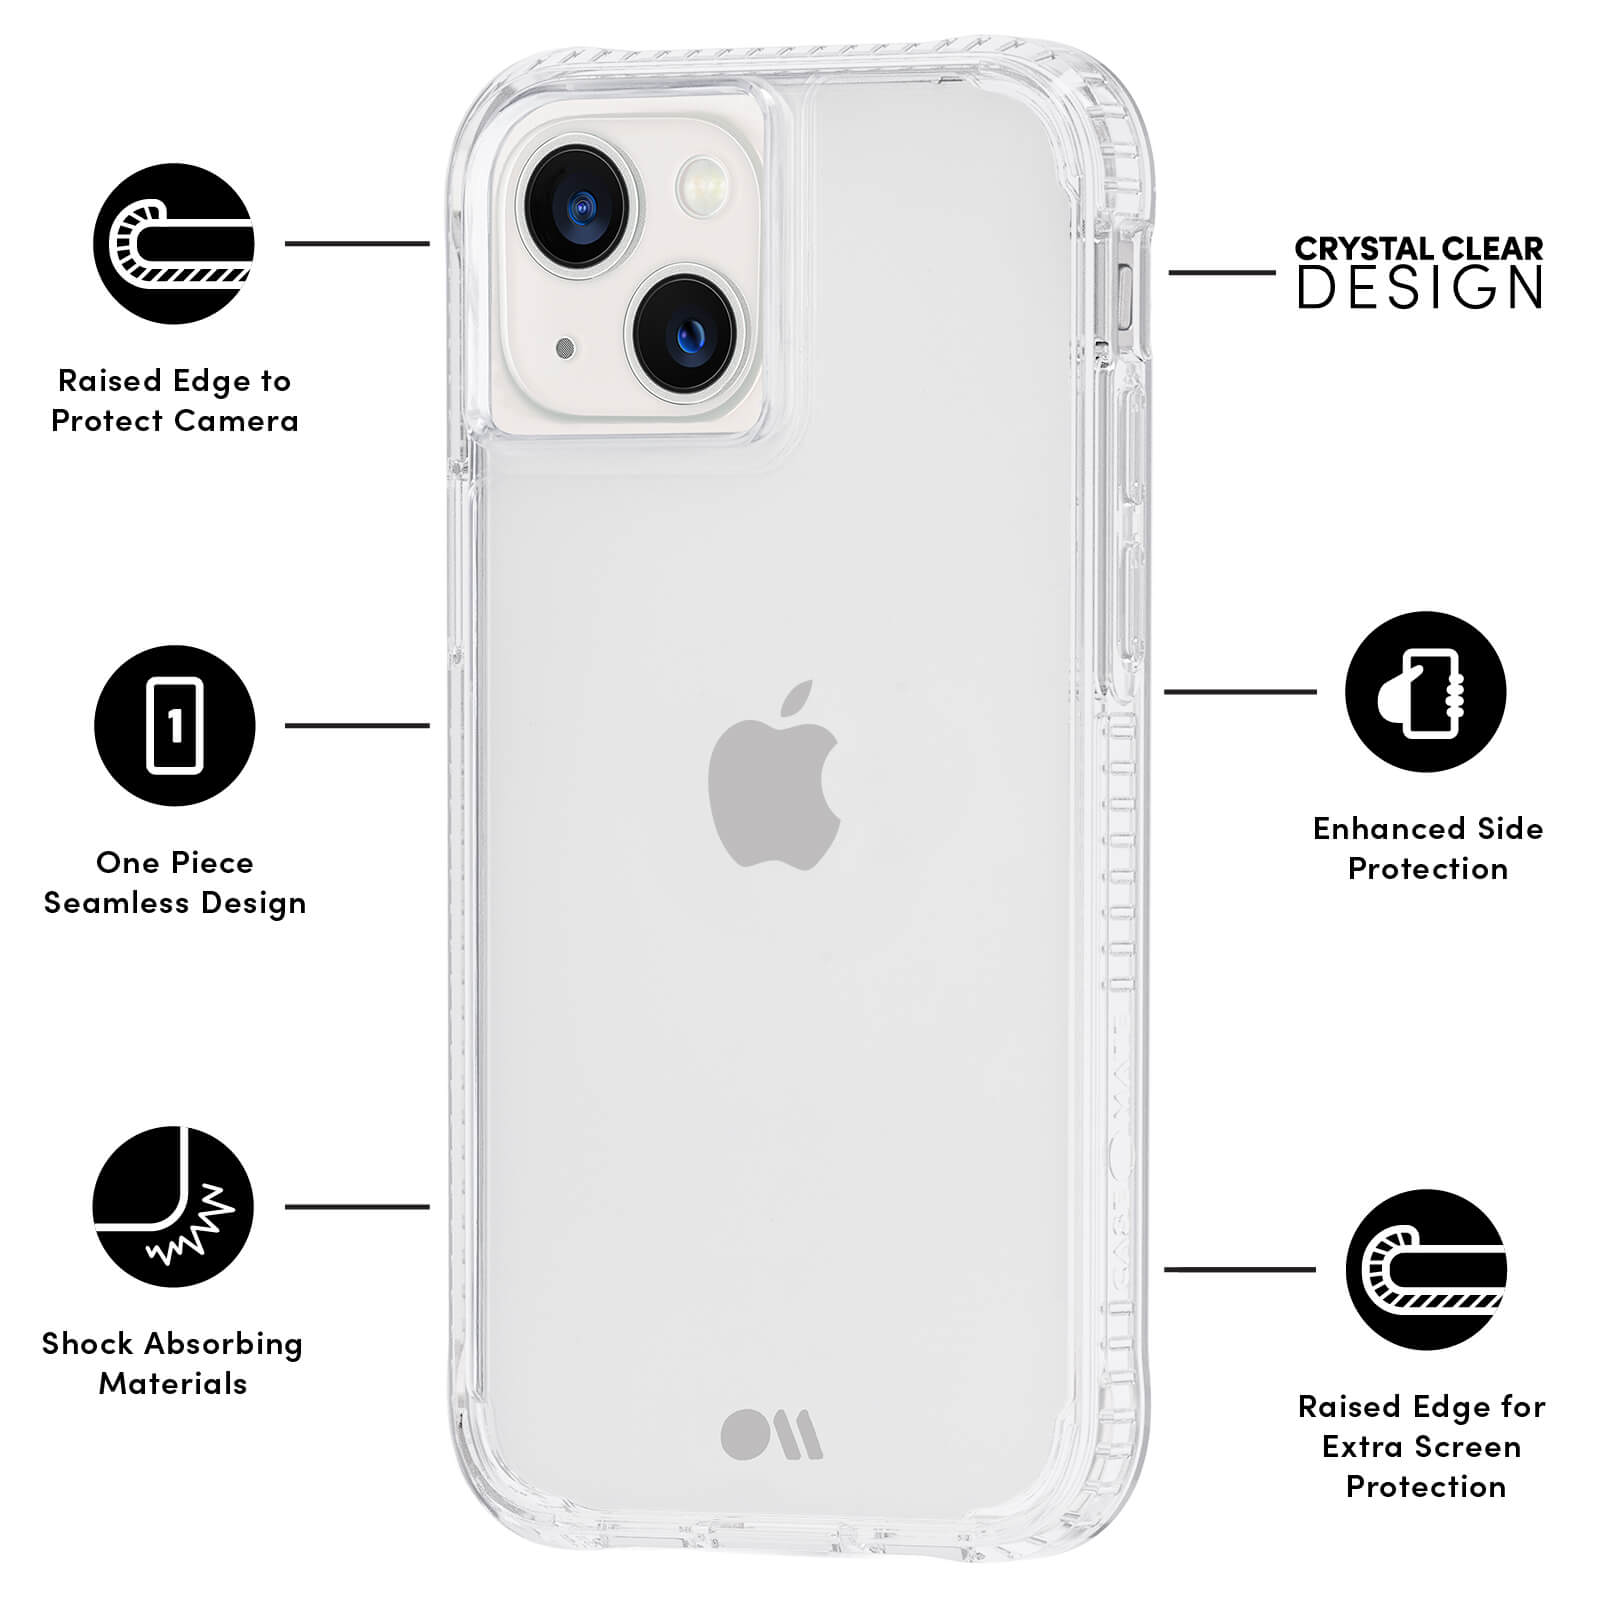 FEATURES: RAISED EDGE TO PROTECT CAMERA, ONE PIECE SEAMLESS DESIGN, SHOCK ABSORBING MATERIALS, CRYSTAL CLEAR DESIGN, ENHANCED SIDE PROTECTION, RAISED EDGE FOR EXTRA SCREEN PROTECTION. COLOR::CLEAR